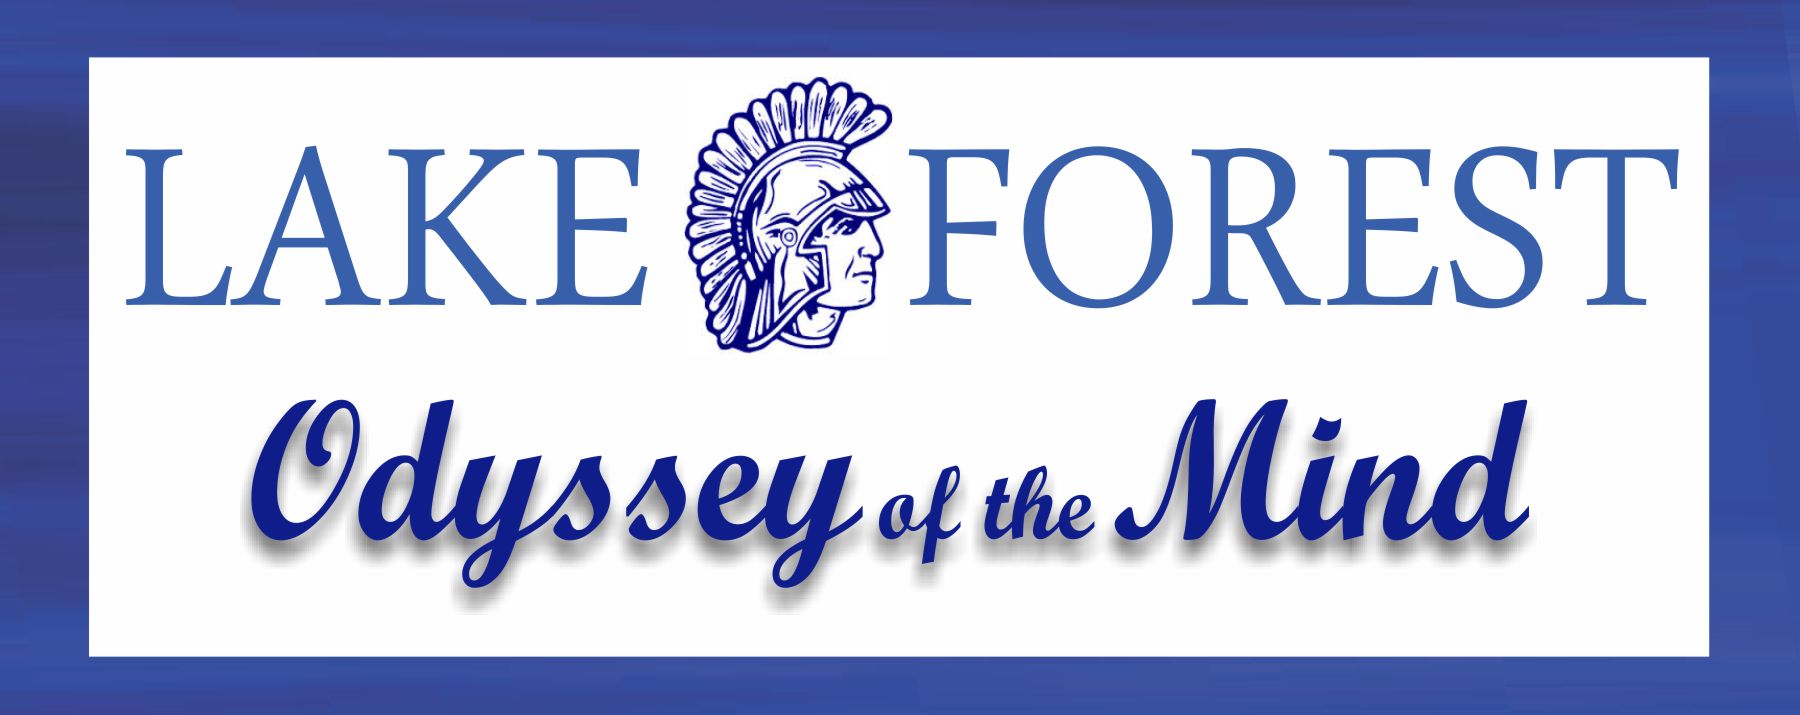 Lake Forest Odyssey of the Mind